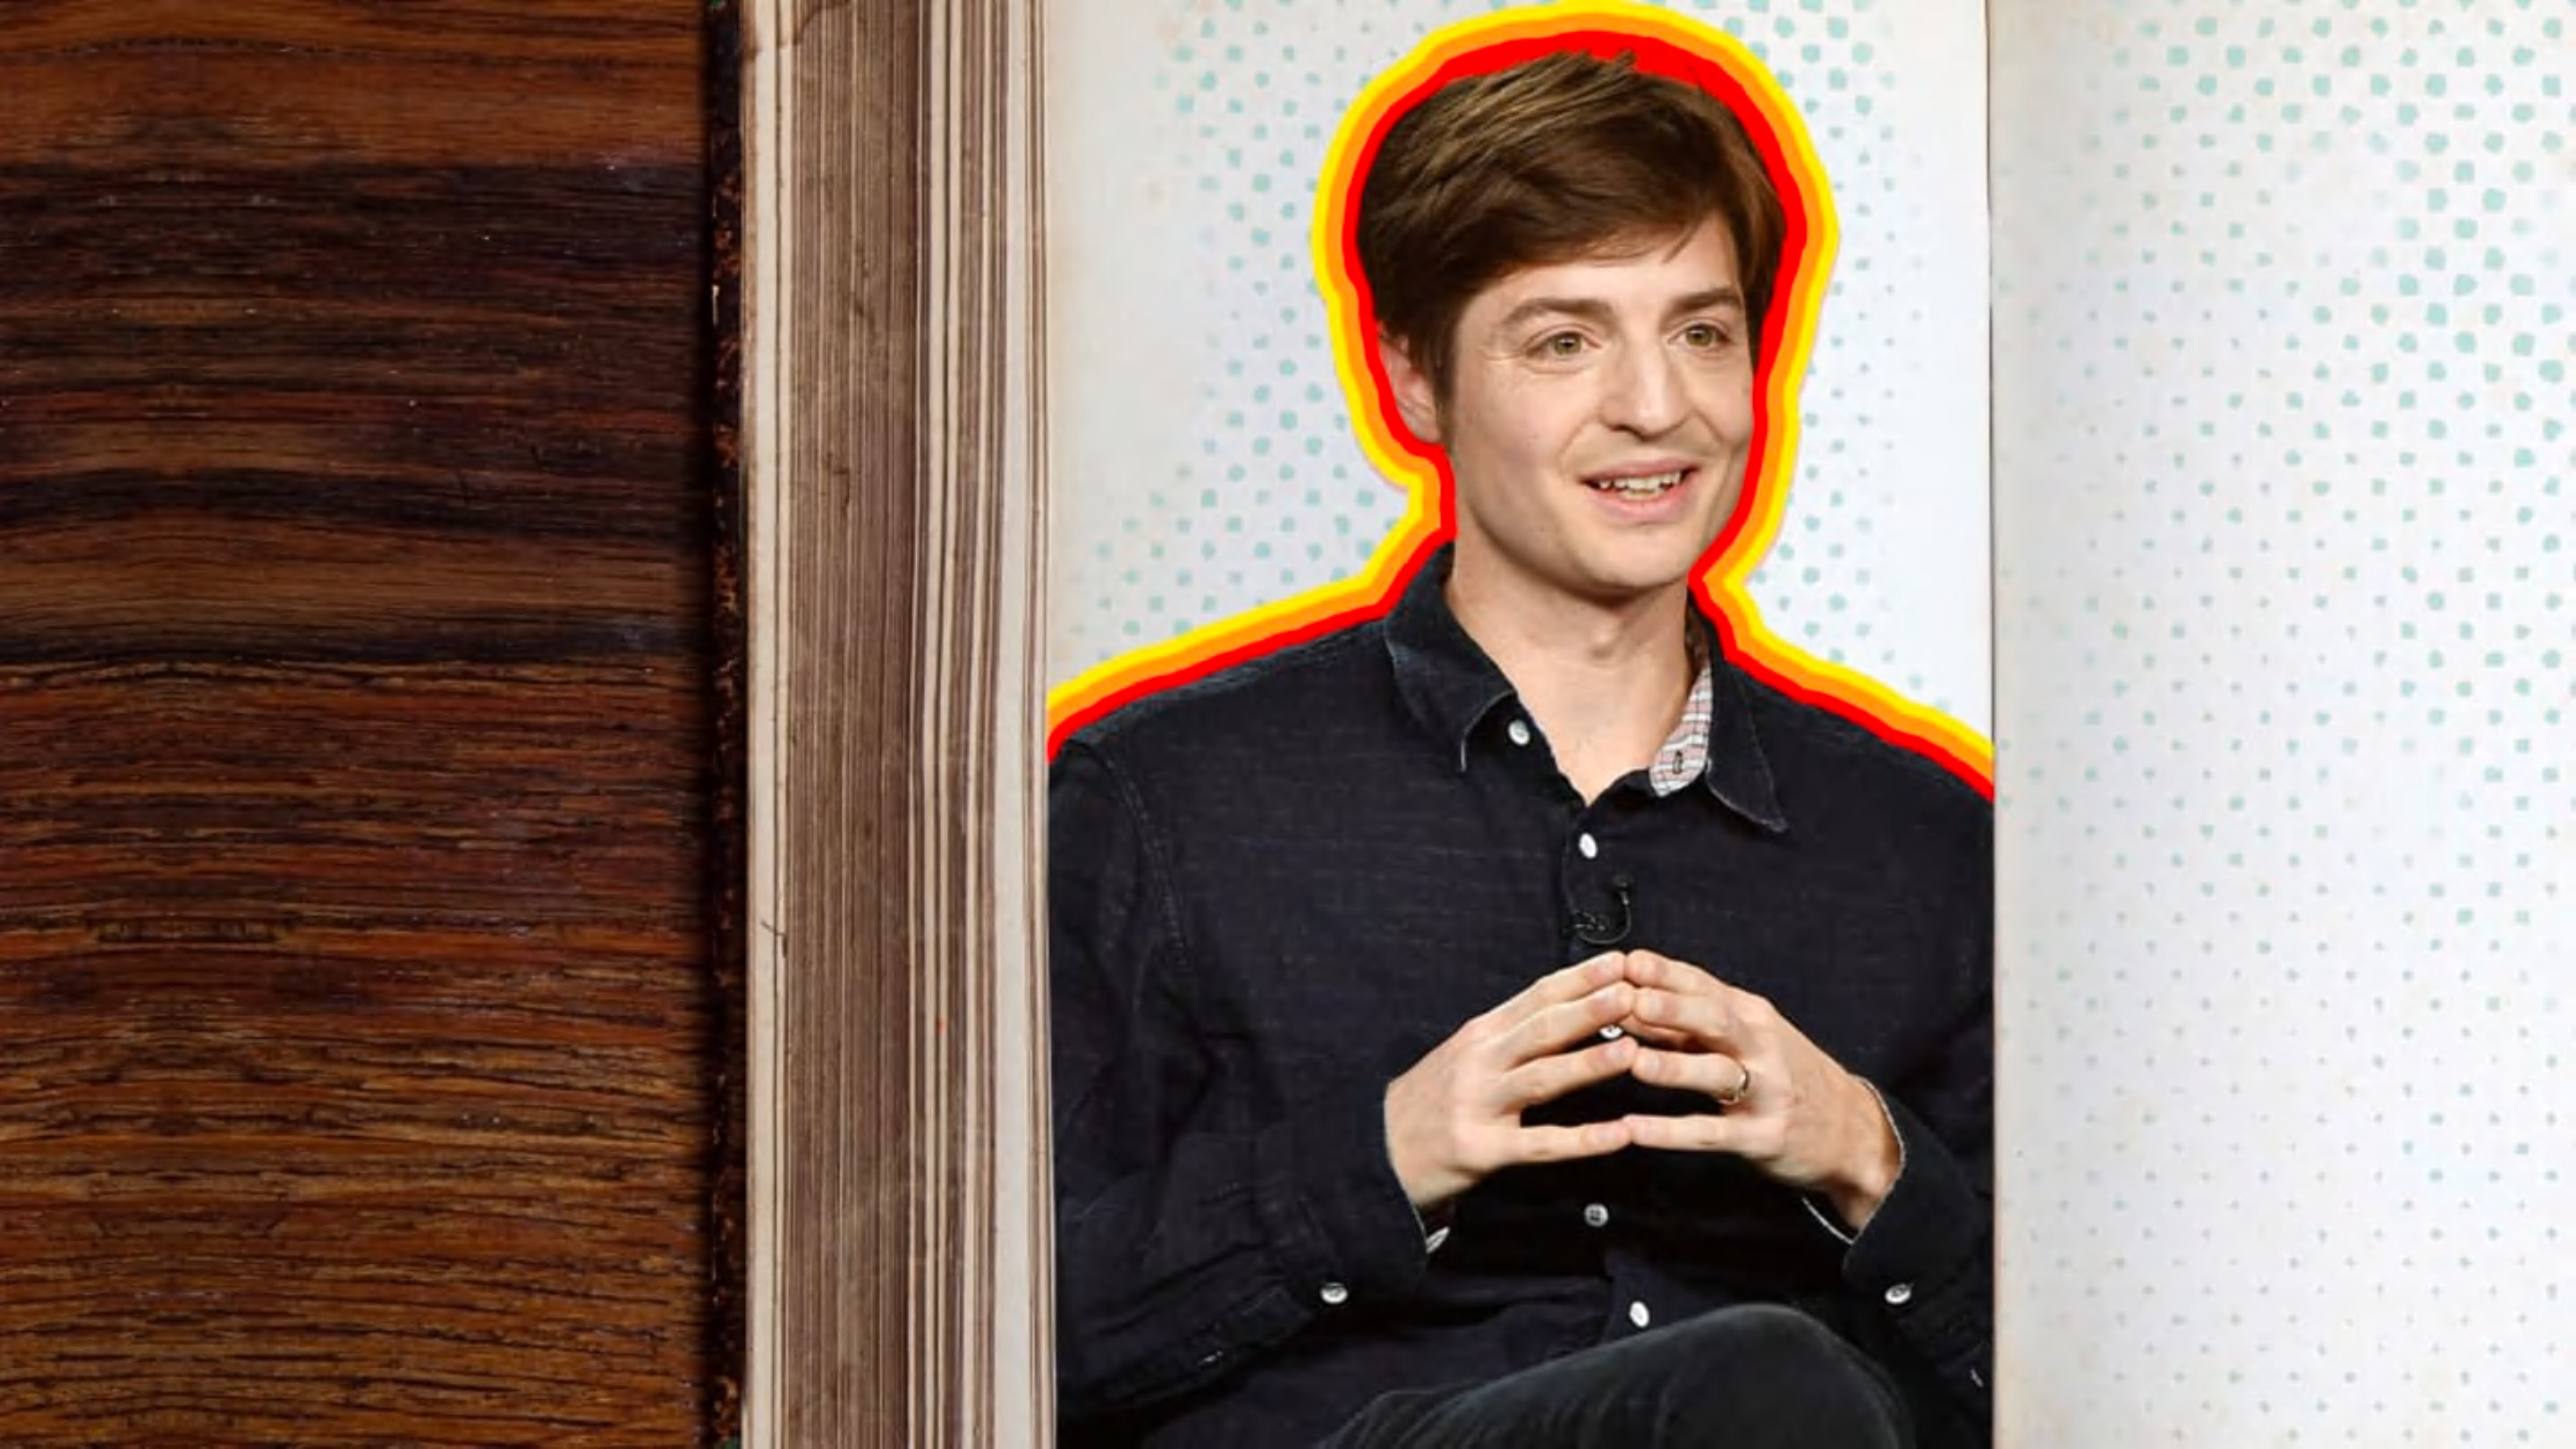 9 Hilarious Books to Read, Recommended by Comedy Writer Simon Rich